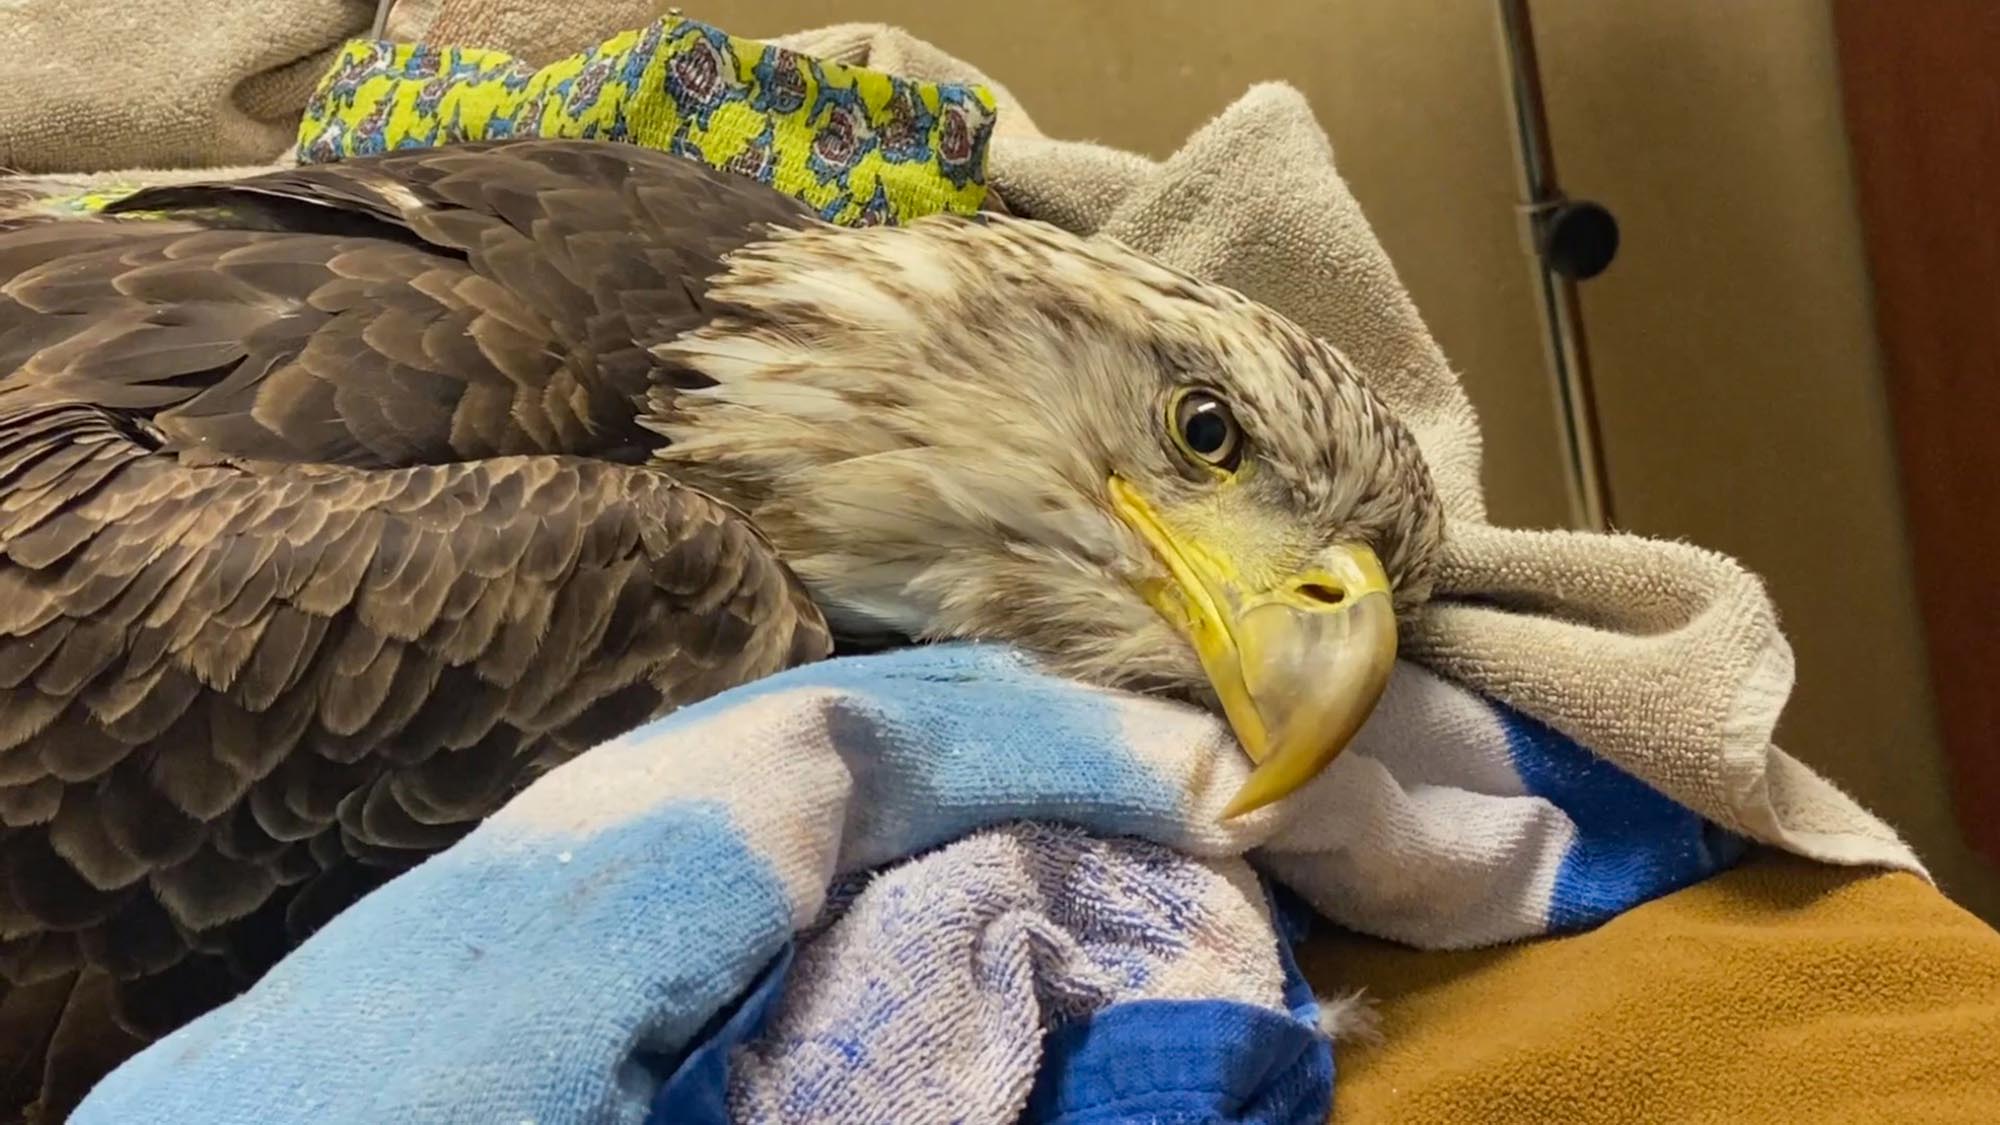 Read more about the article Bald Eagle Shot By Hunters Takes To The Air Again In Amazing Slow-Mo Video After Life Saving Surgery